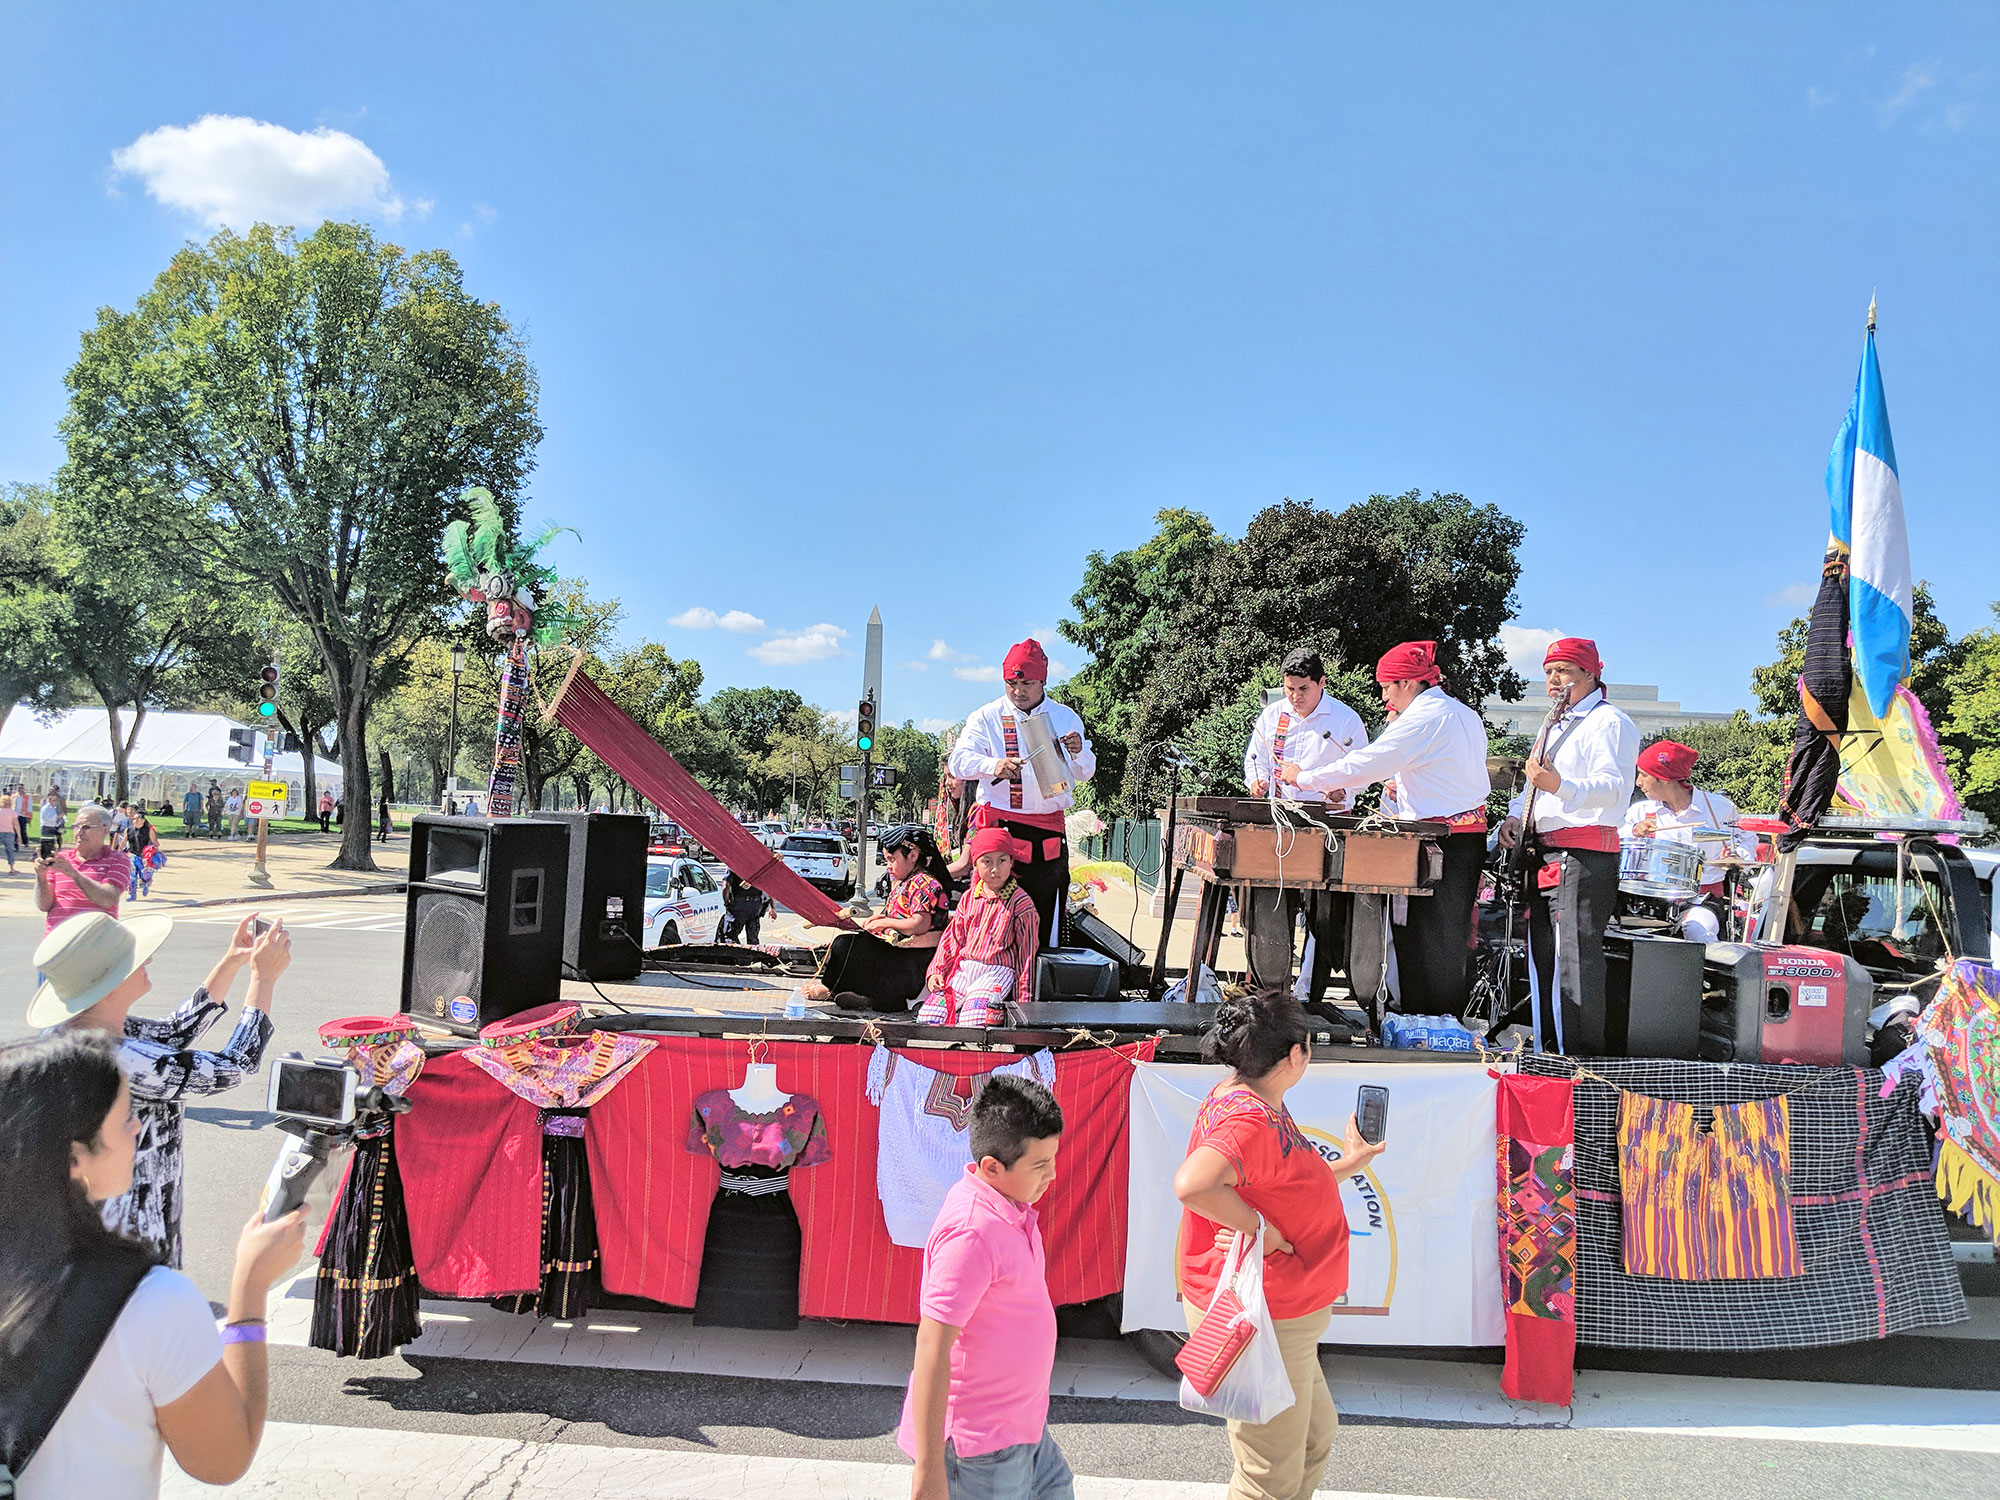 Peruvian musicians performing at Fiesta DC near the National Mall in Washington, DC.